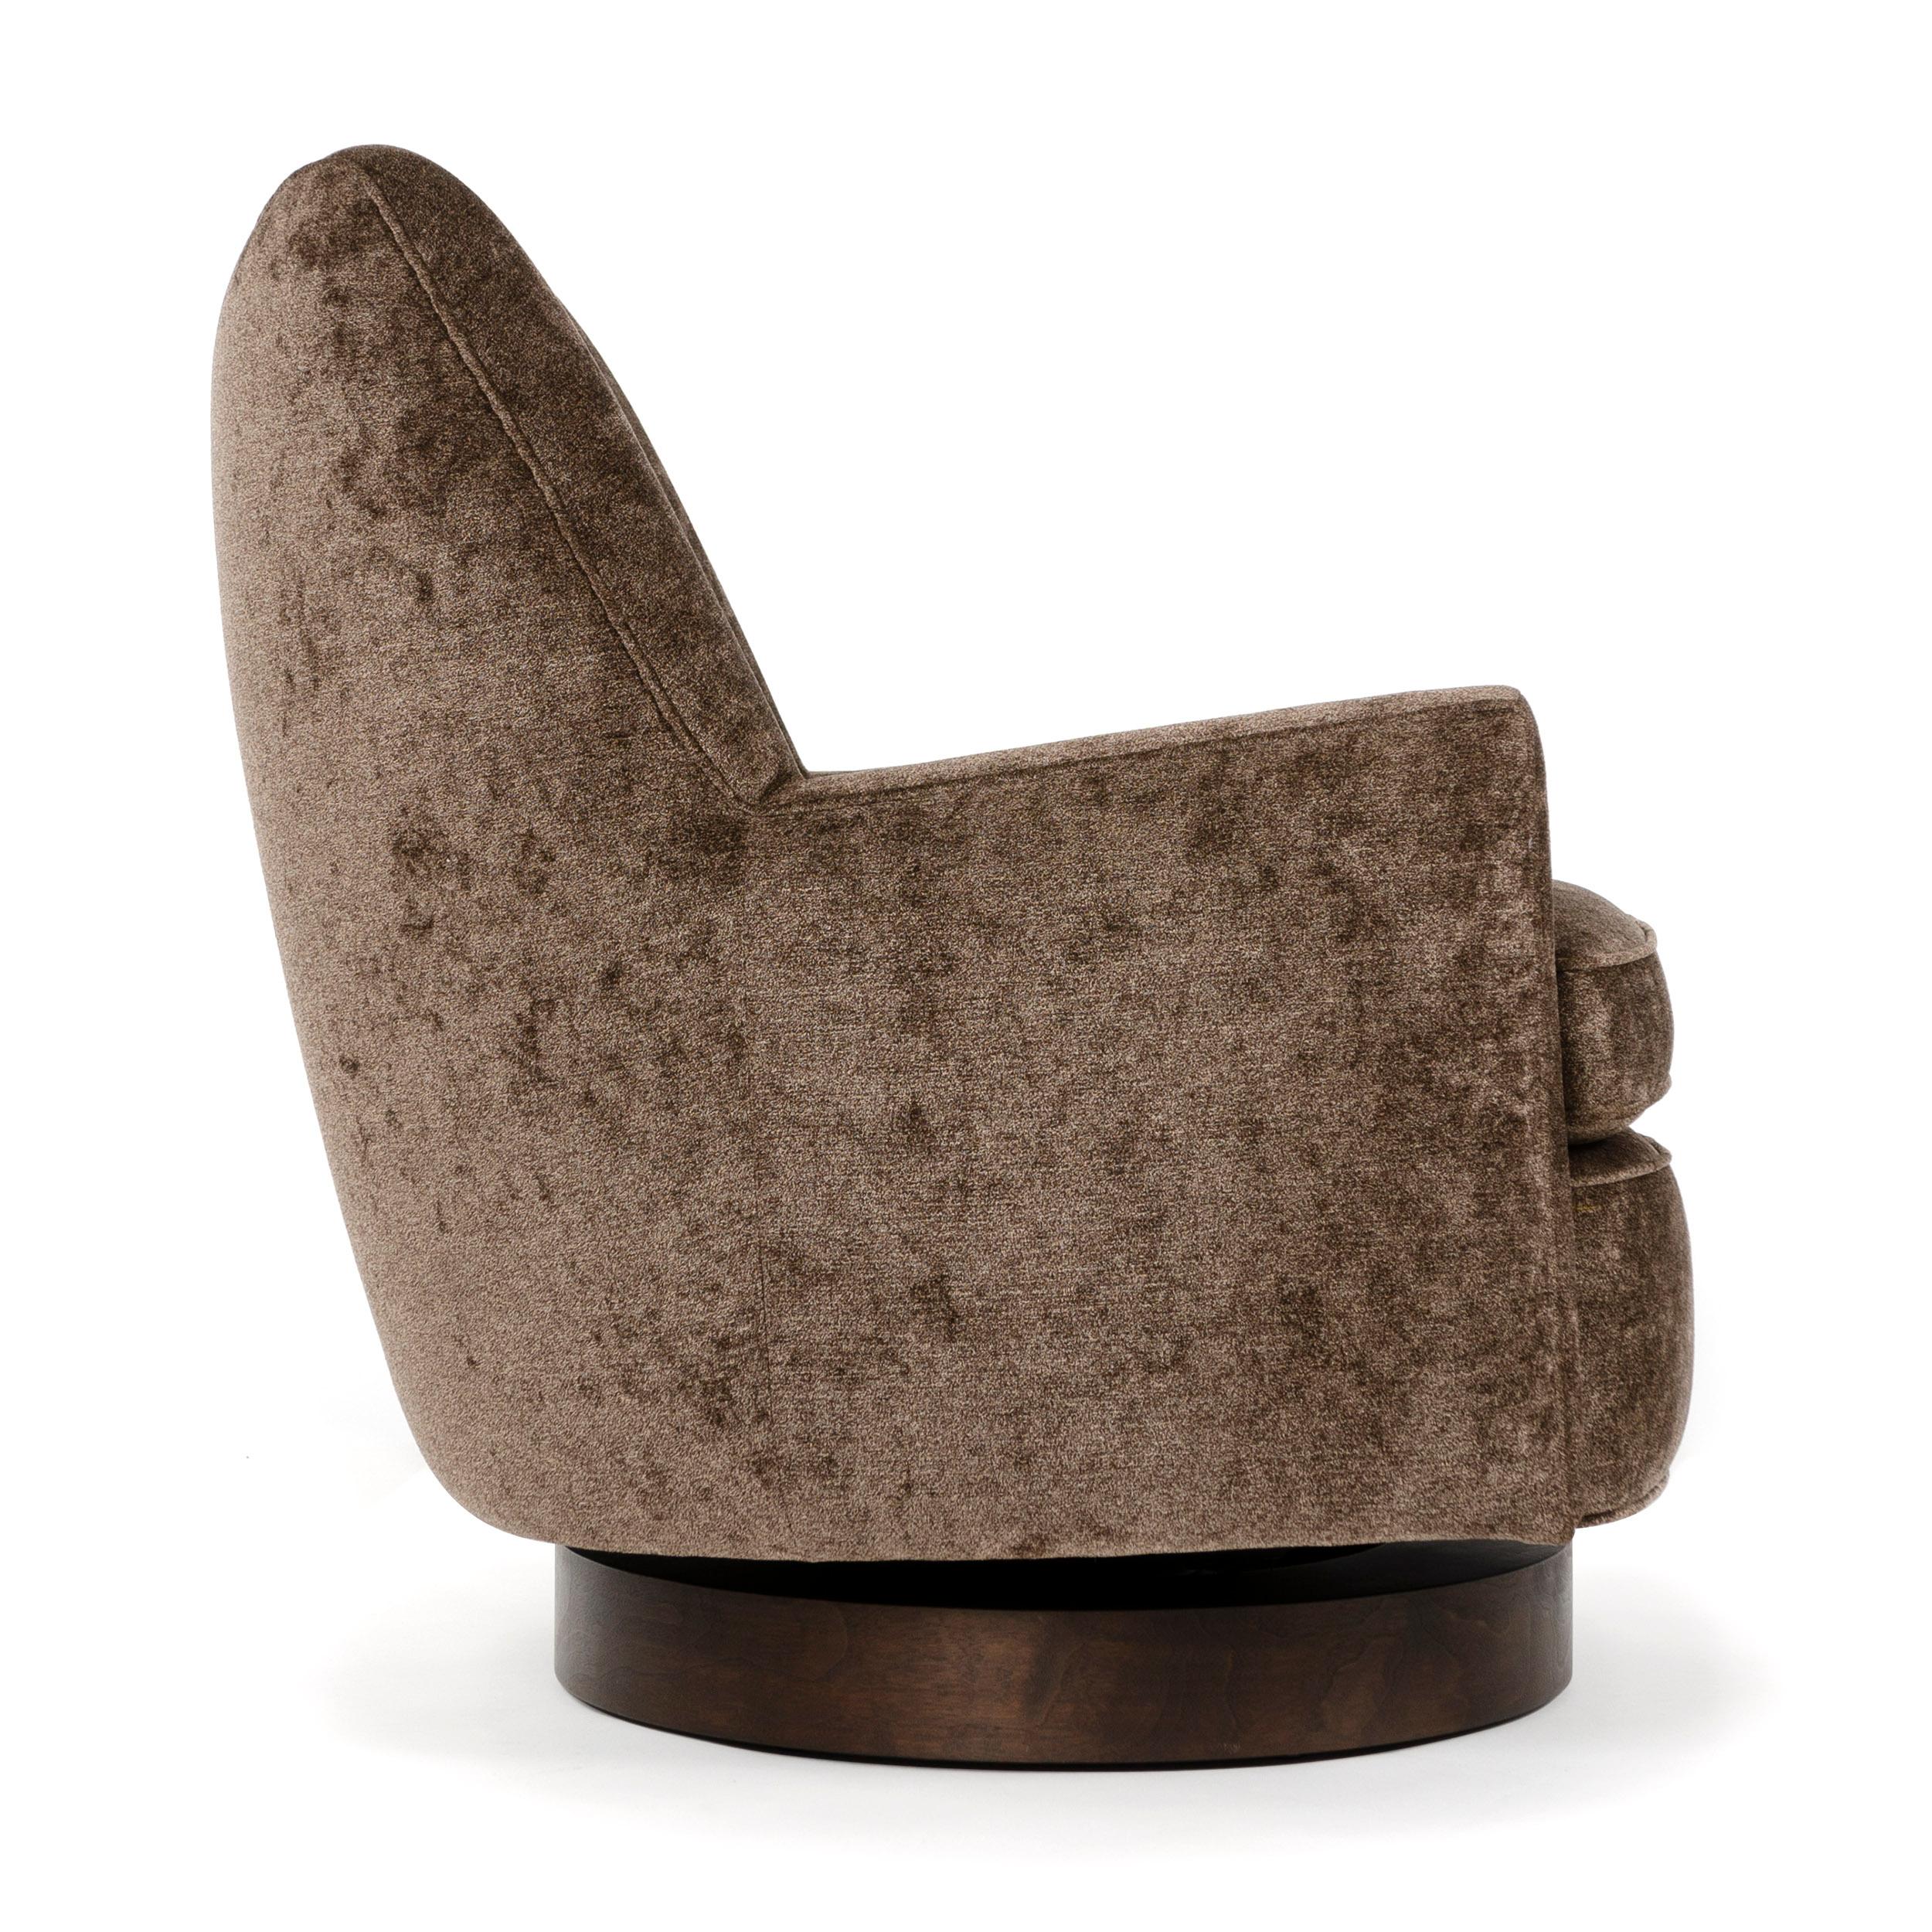 A swivel lounge chair on an ebonized ash disc base. Newly upholstered in brown chenille.